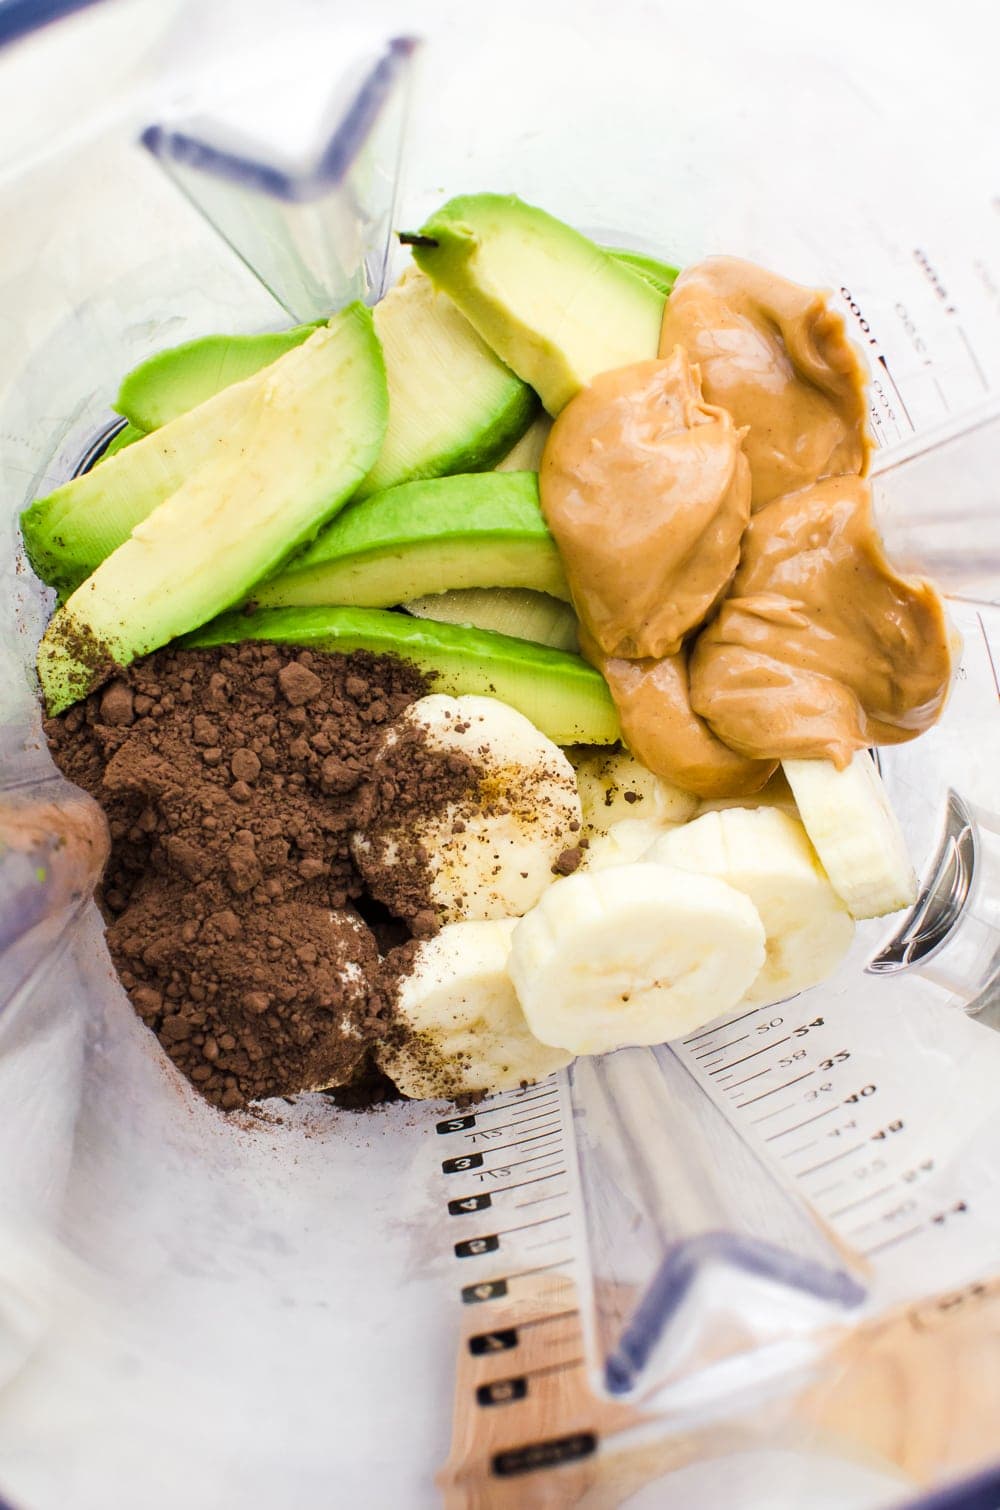 avocado chocolate peanut butter smoothie ingredients in a blender close up